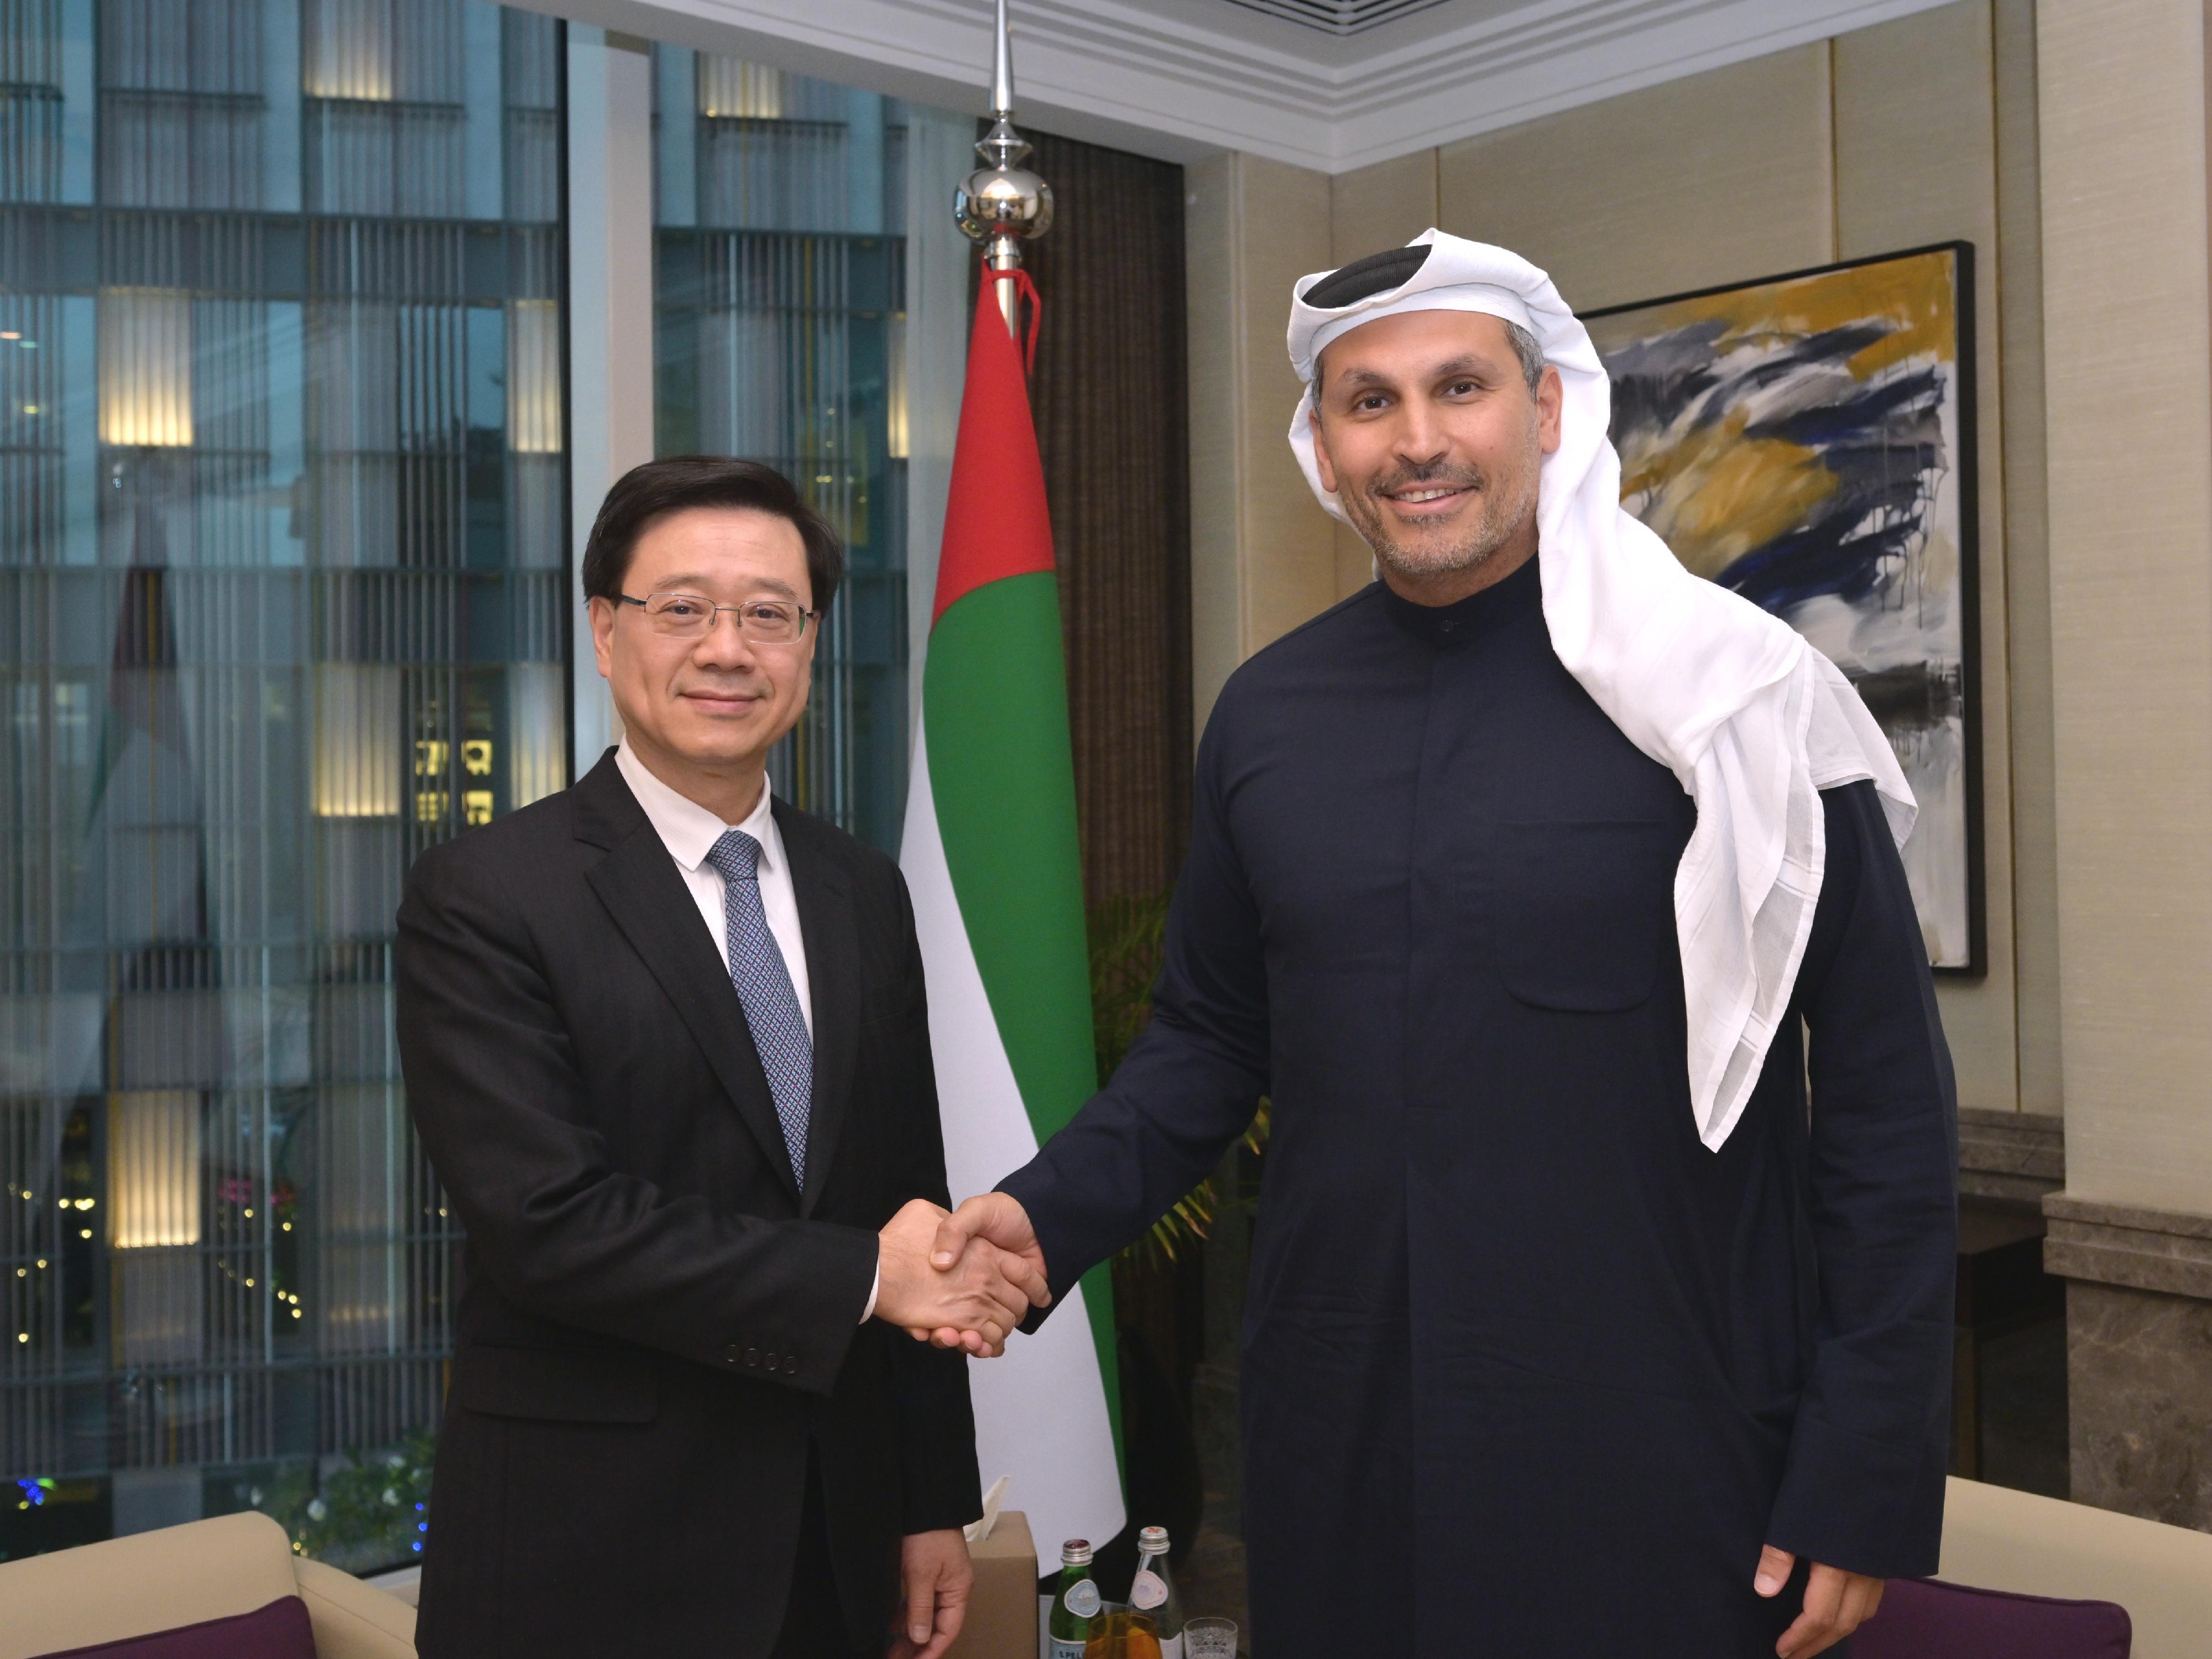 The Chief Executive, Mr John Lee (left), meets with the Managing Director and Group Chief Executive Officer of Mubadala Investment Company, Mr Khaldoon Khalifa Al Mubarak (right), in Abu Dhabi, the United Arab Emirates today (February 7, Abu Dhabi time).